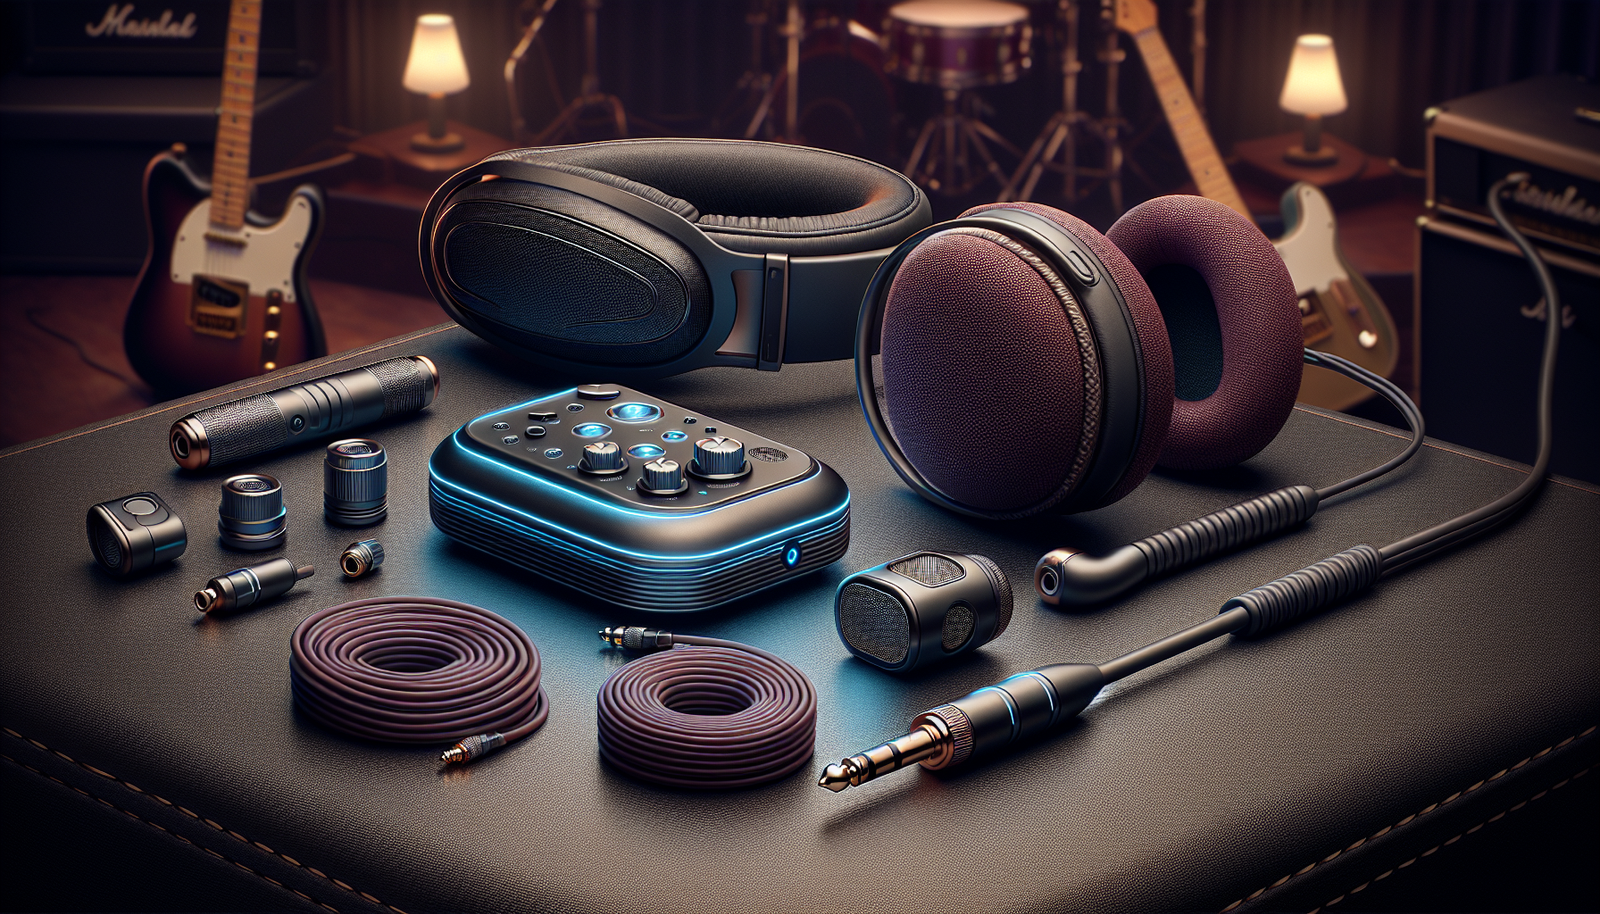 Accessories for enhanced guitar amp headphone experience